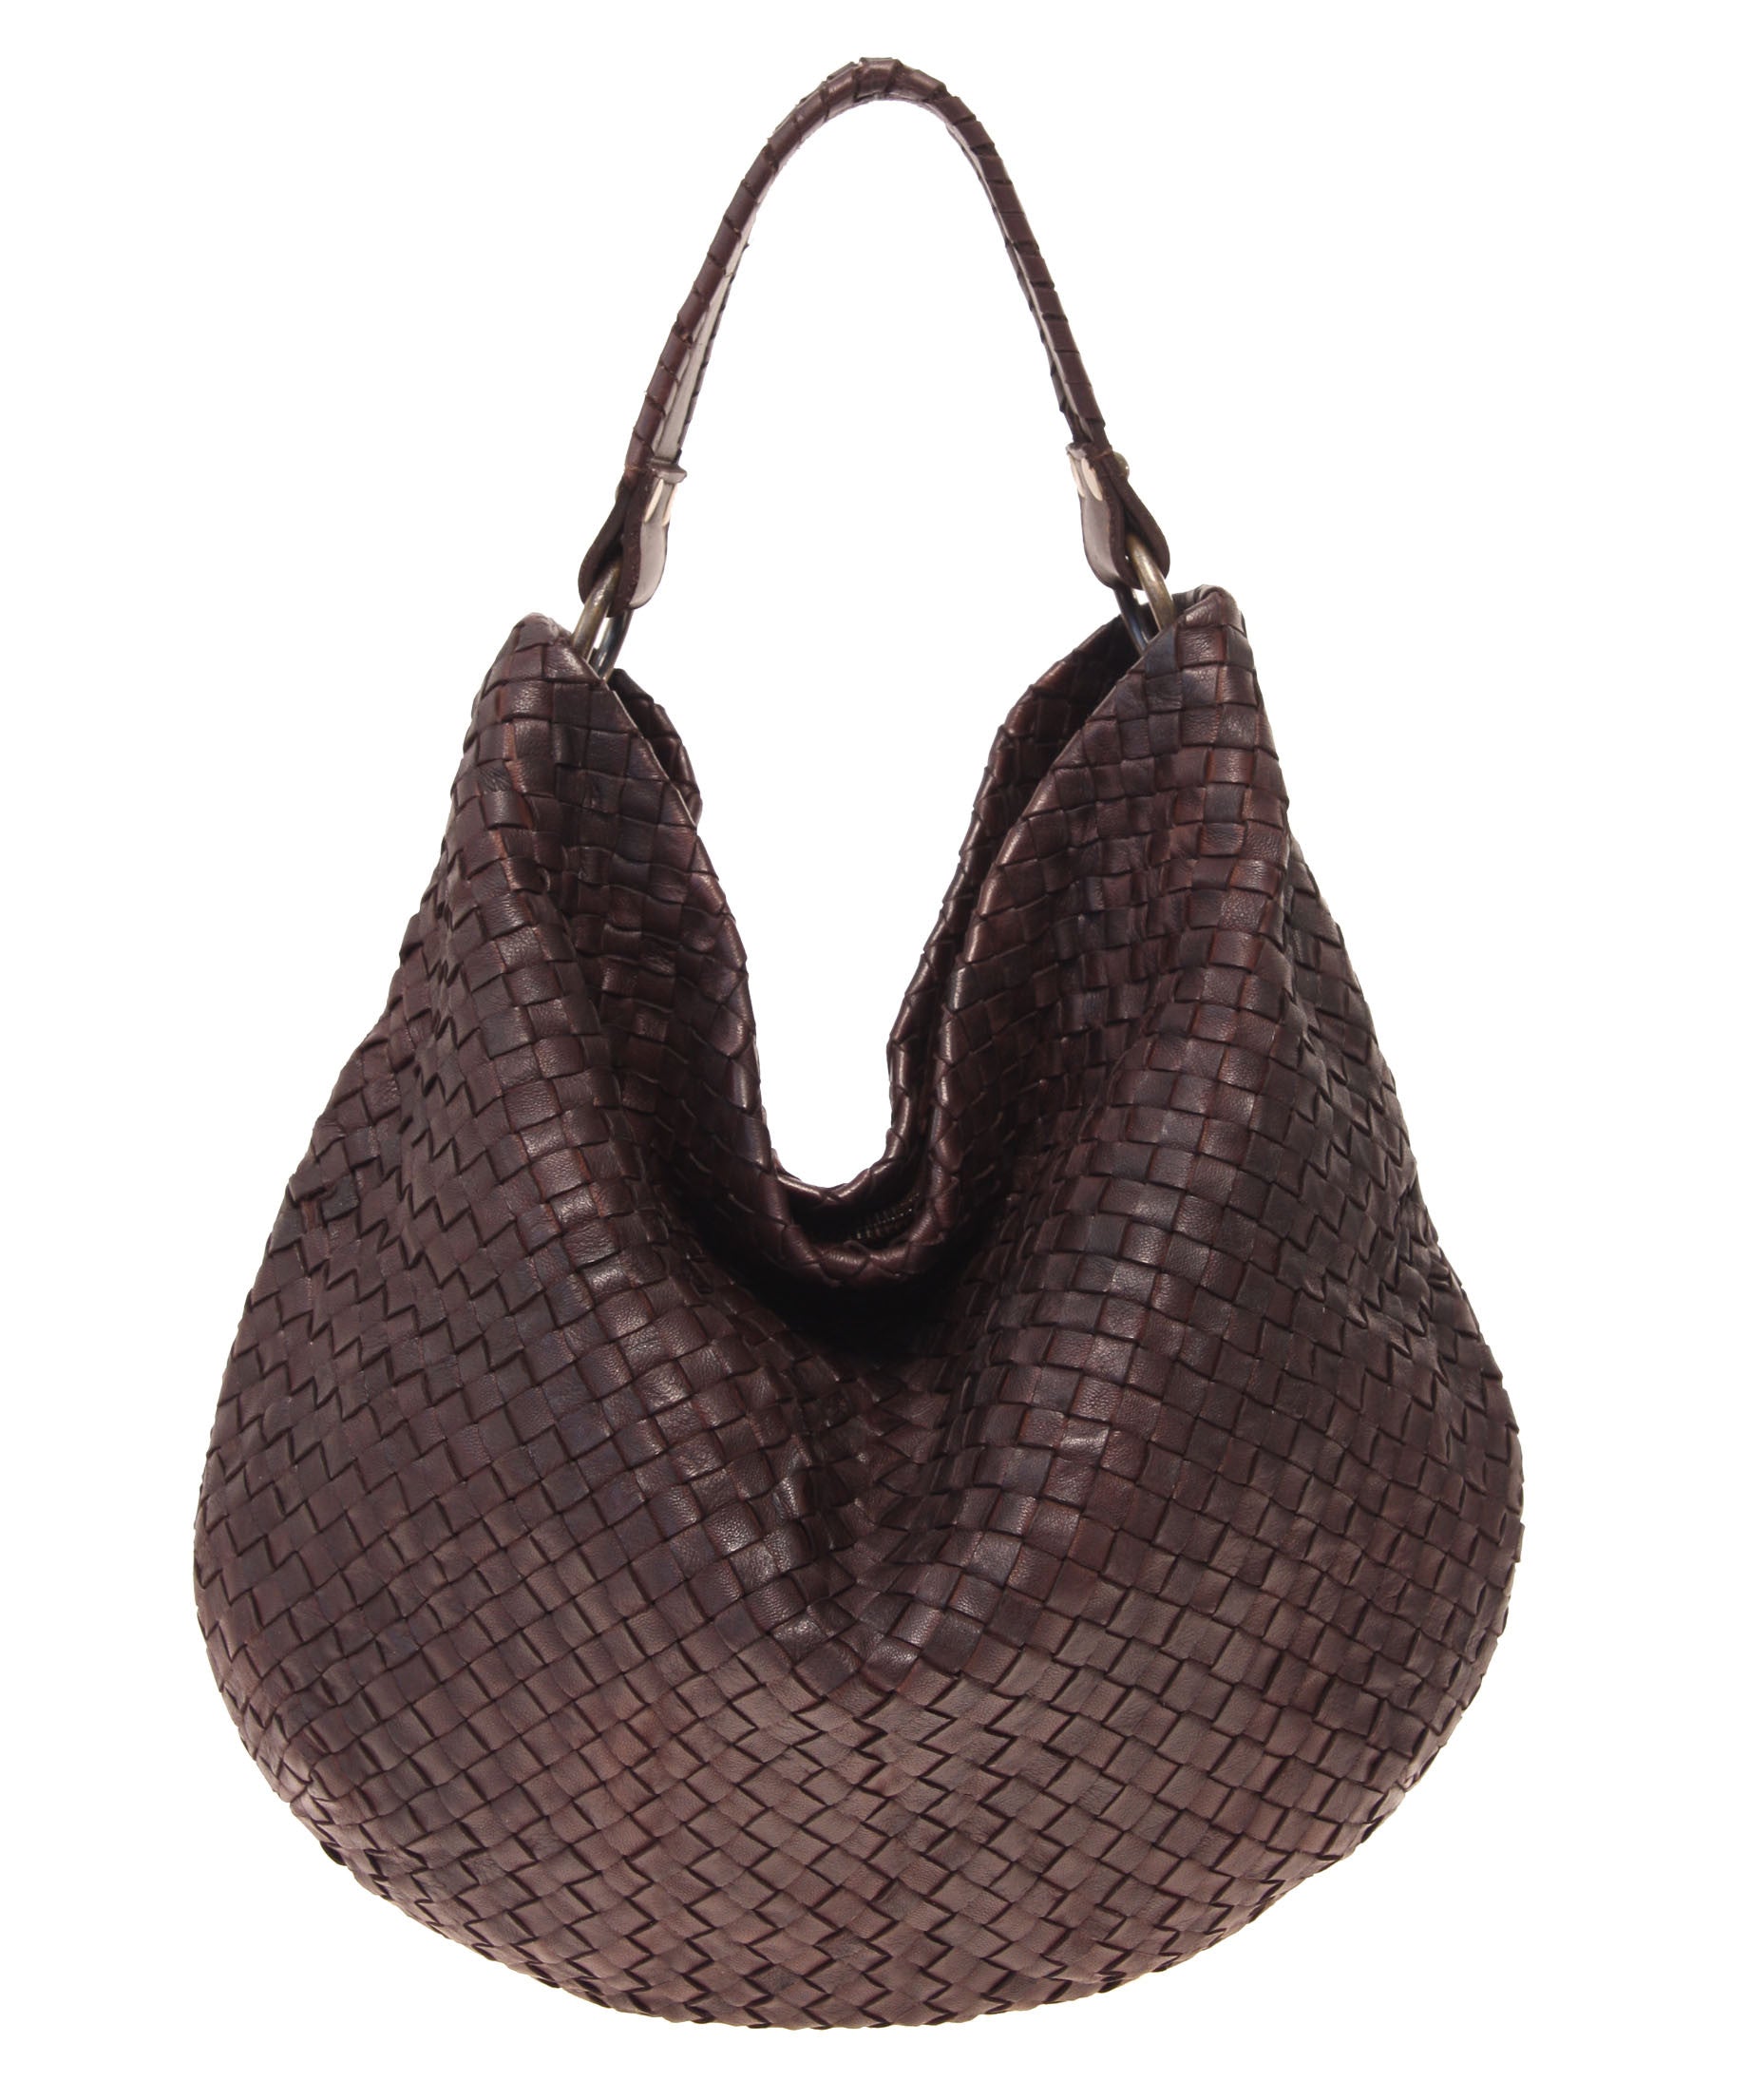 Rounded Woven Leather Hobo with Whipstitch Handle (9098841355)